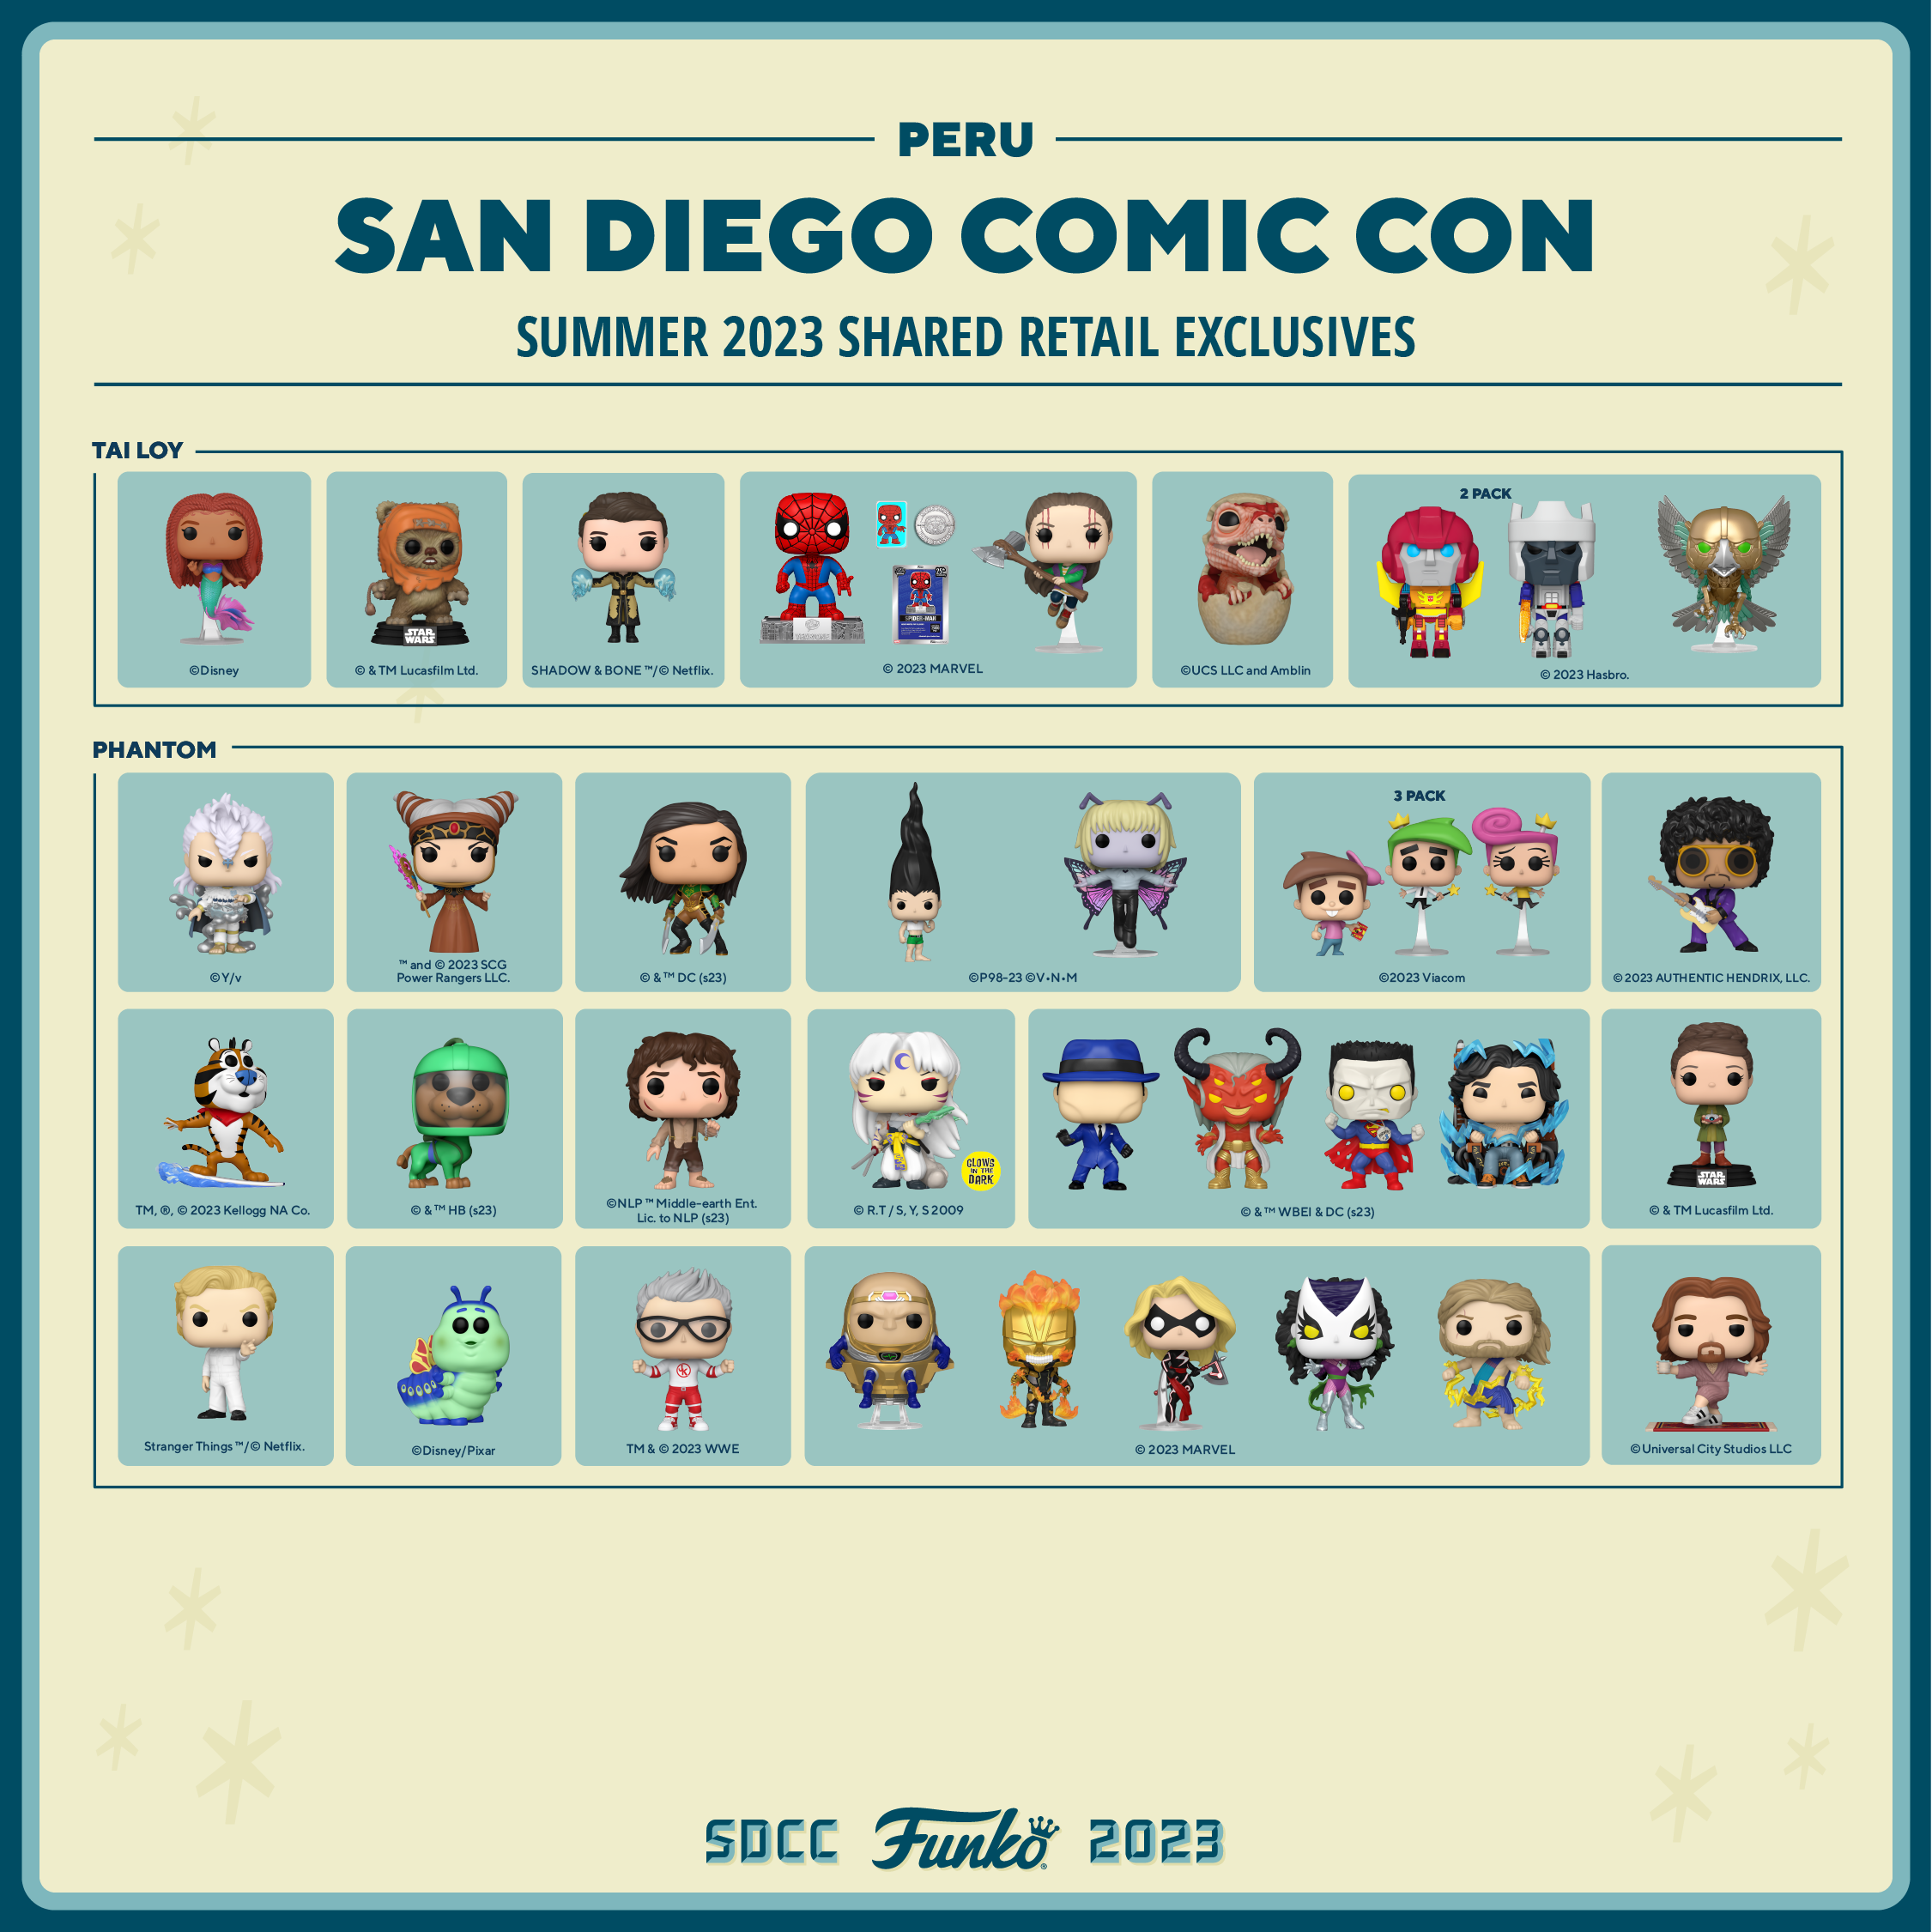 This just in from the Funkoville Visitor's Center, here is the 2023 SDCC Shared Retailer Guide for Peru!